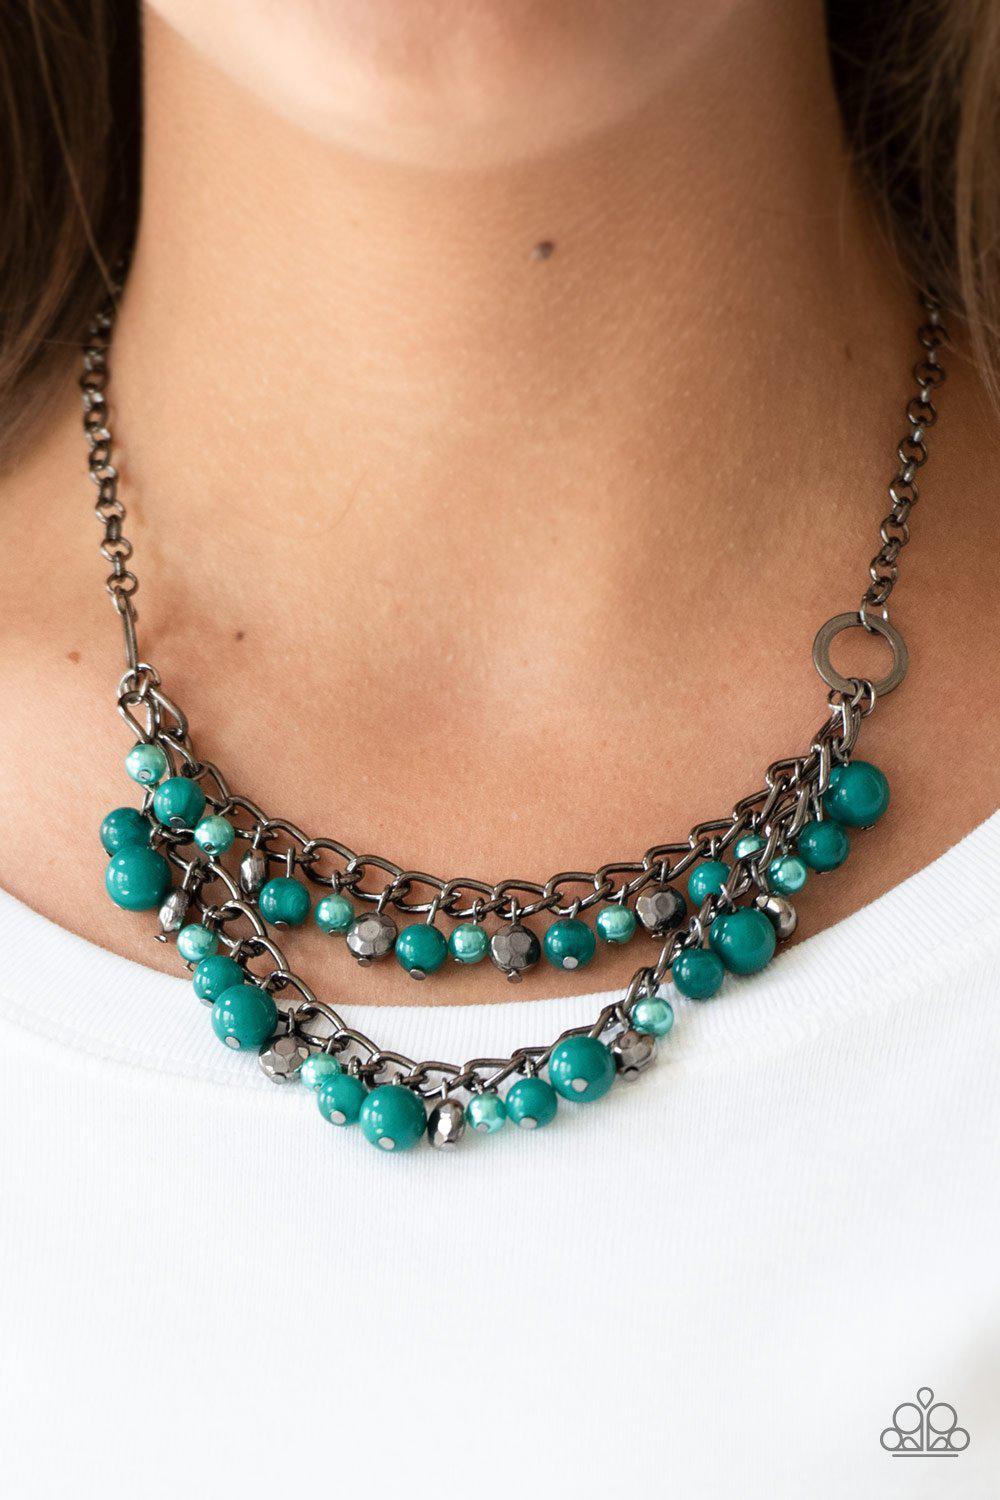 Watch Me Now Gunmetal and Green Necklace - Paparazzi Accessories-CarasShop.com - $5 Jewelry by Cara Jewels